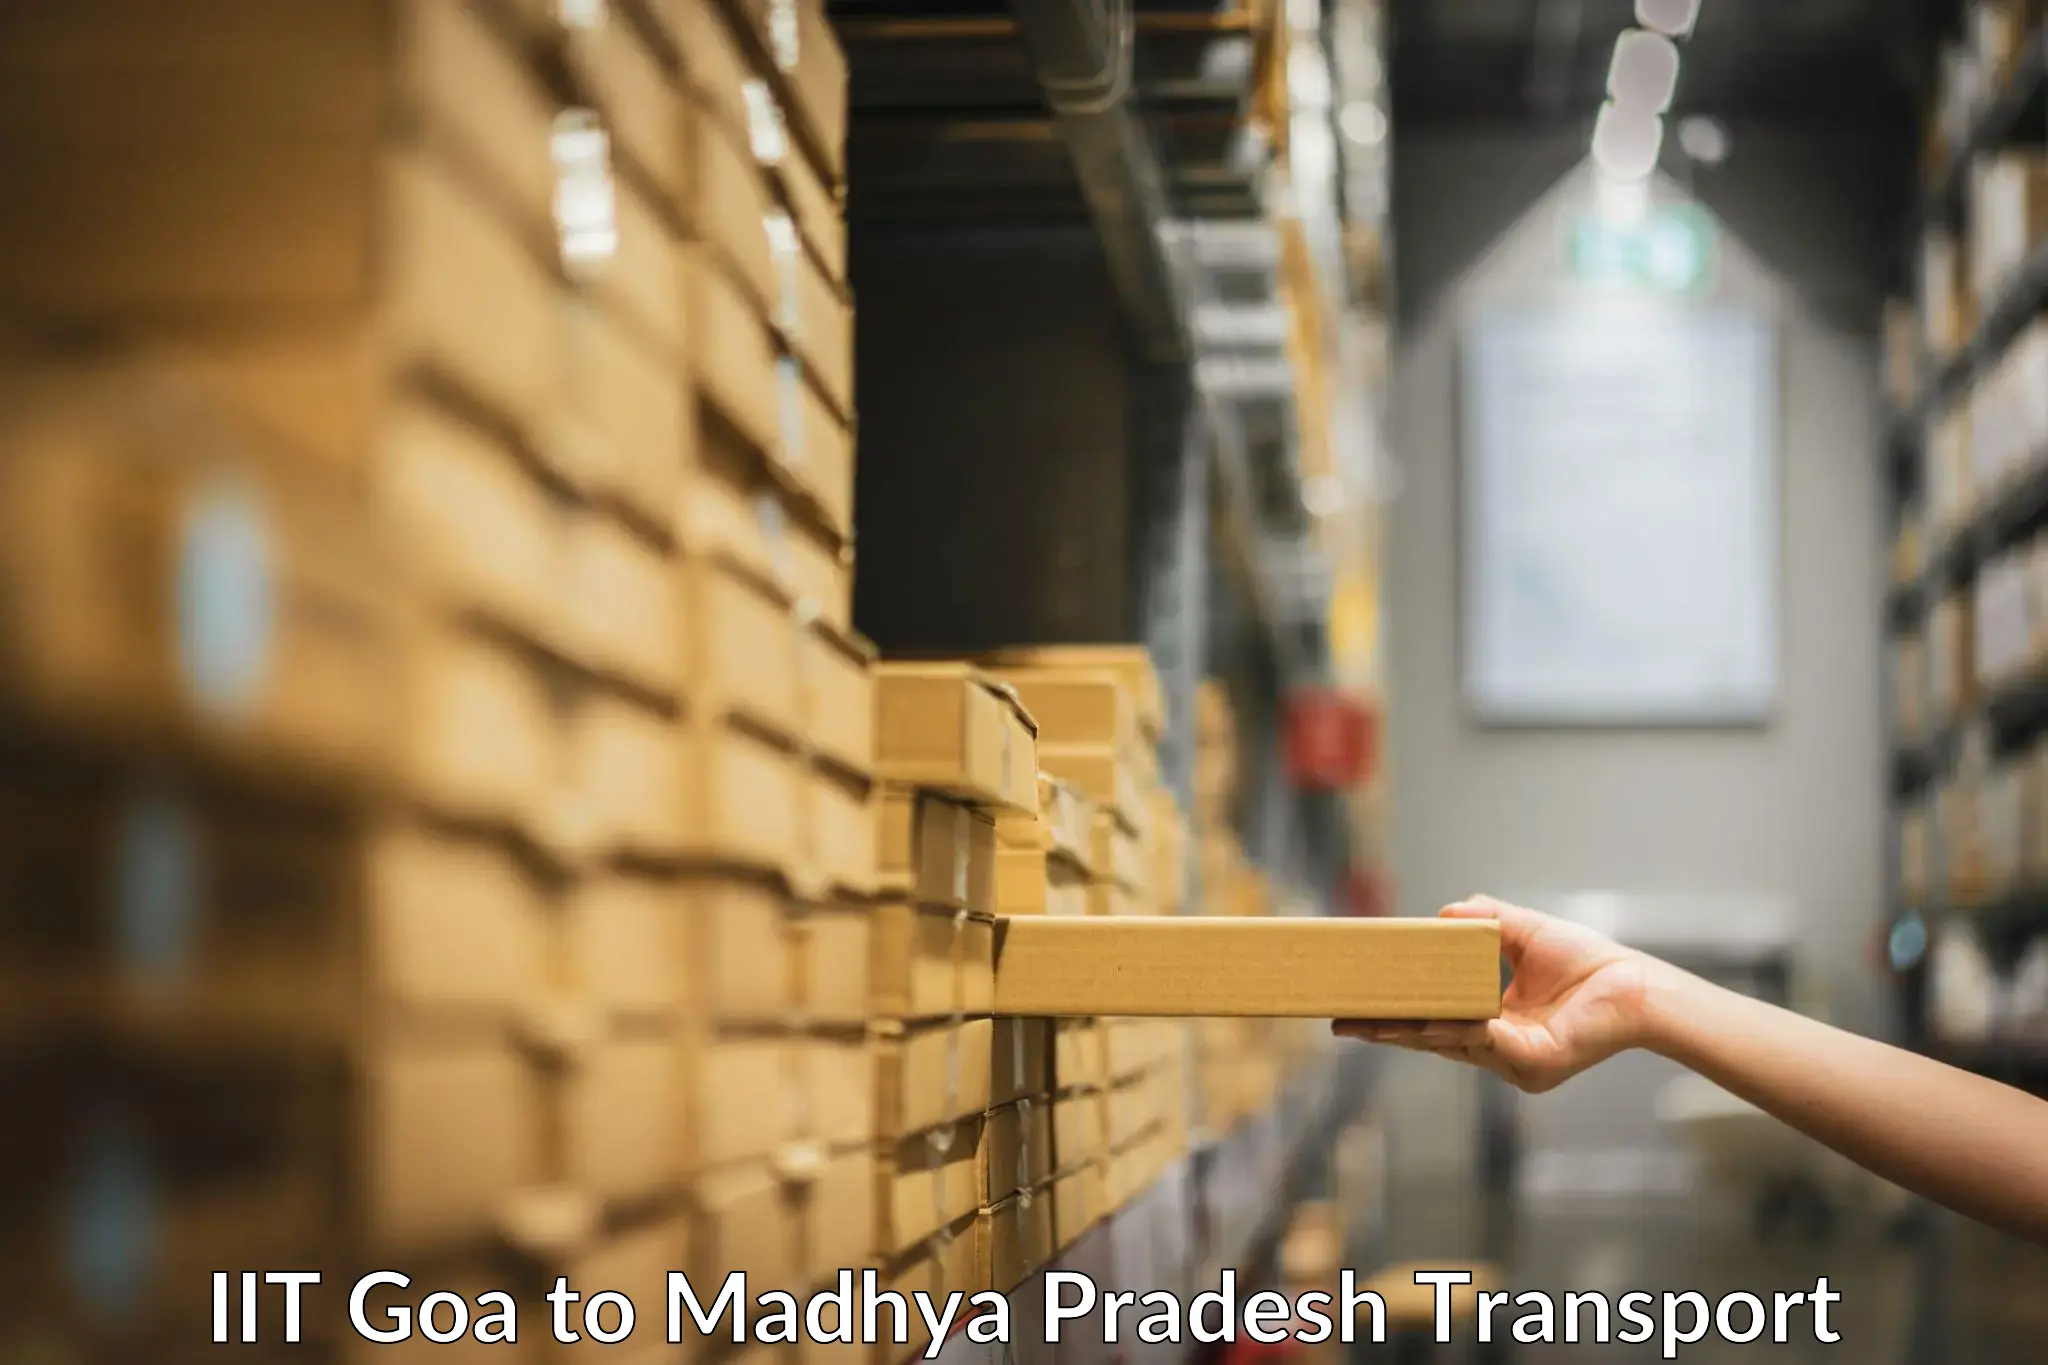 Transport bike from one state to another IIT Goa to Indore